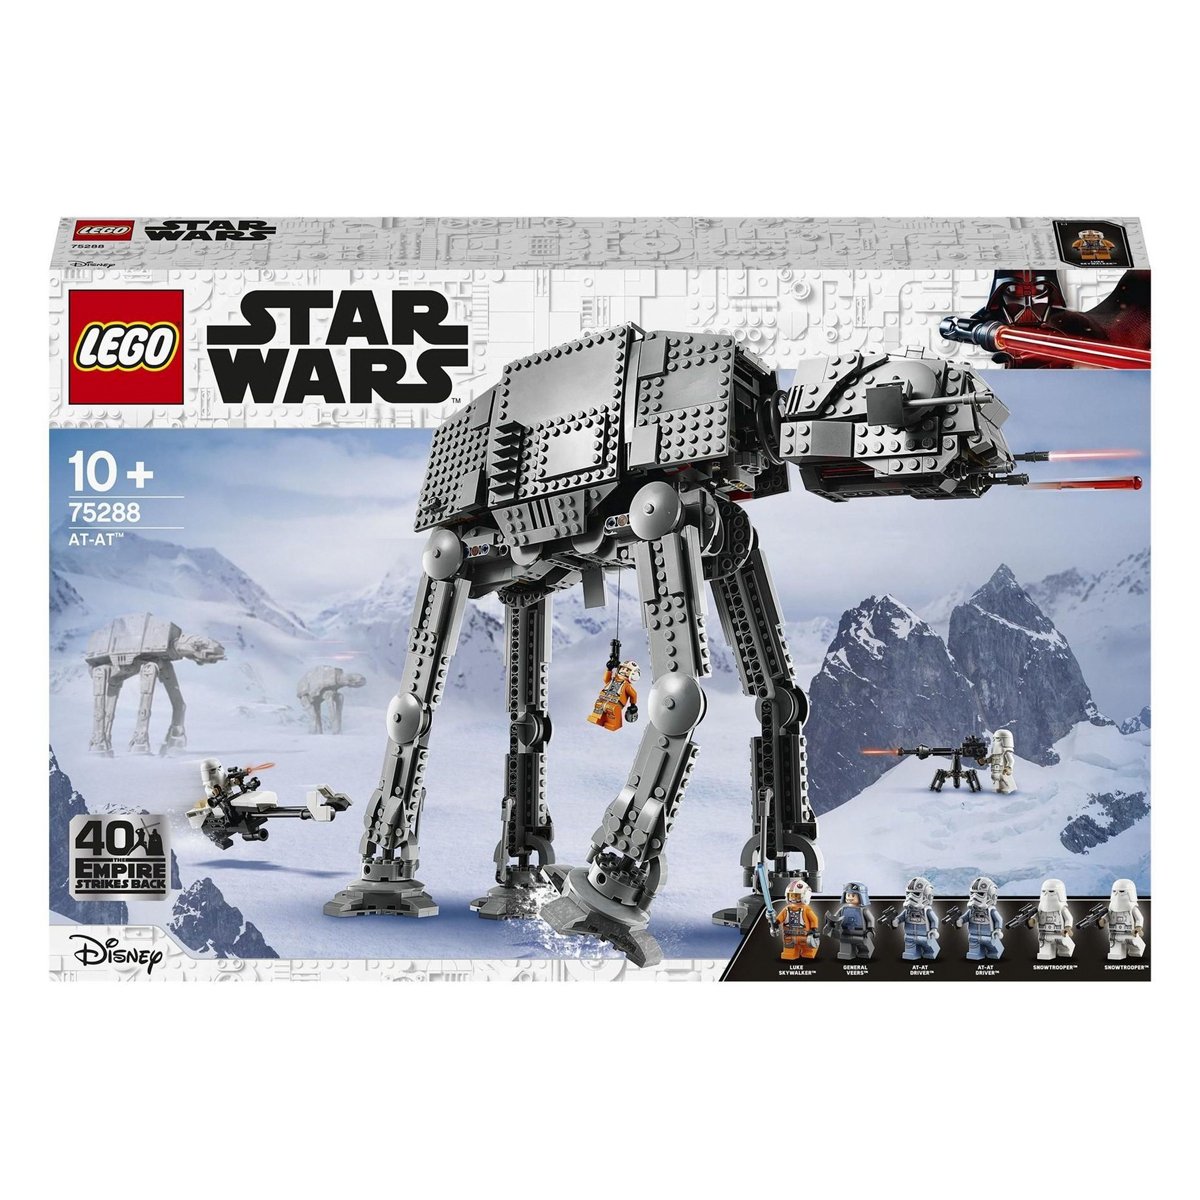 LEGO 75288 Star Wars AT-AT Walker Toy 40th Anniversary, £140